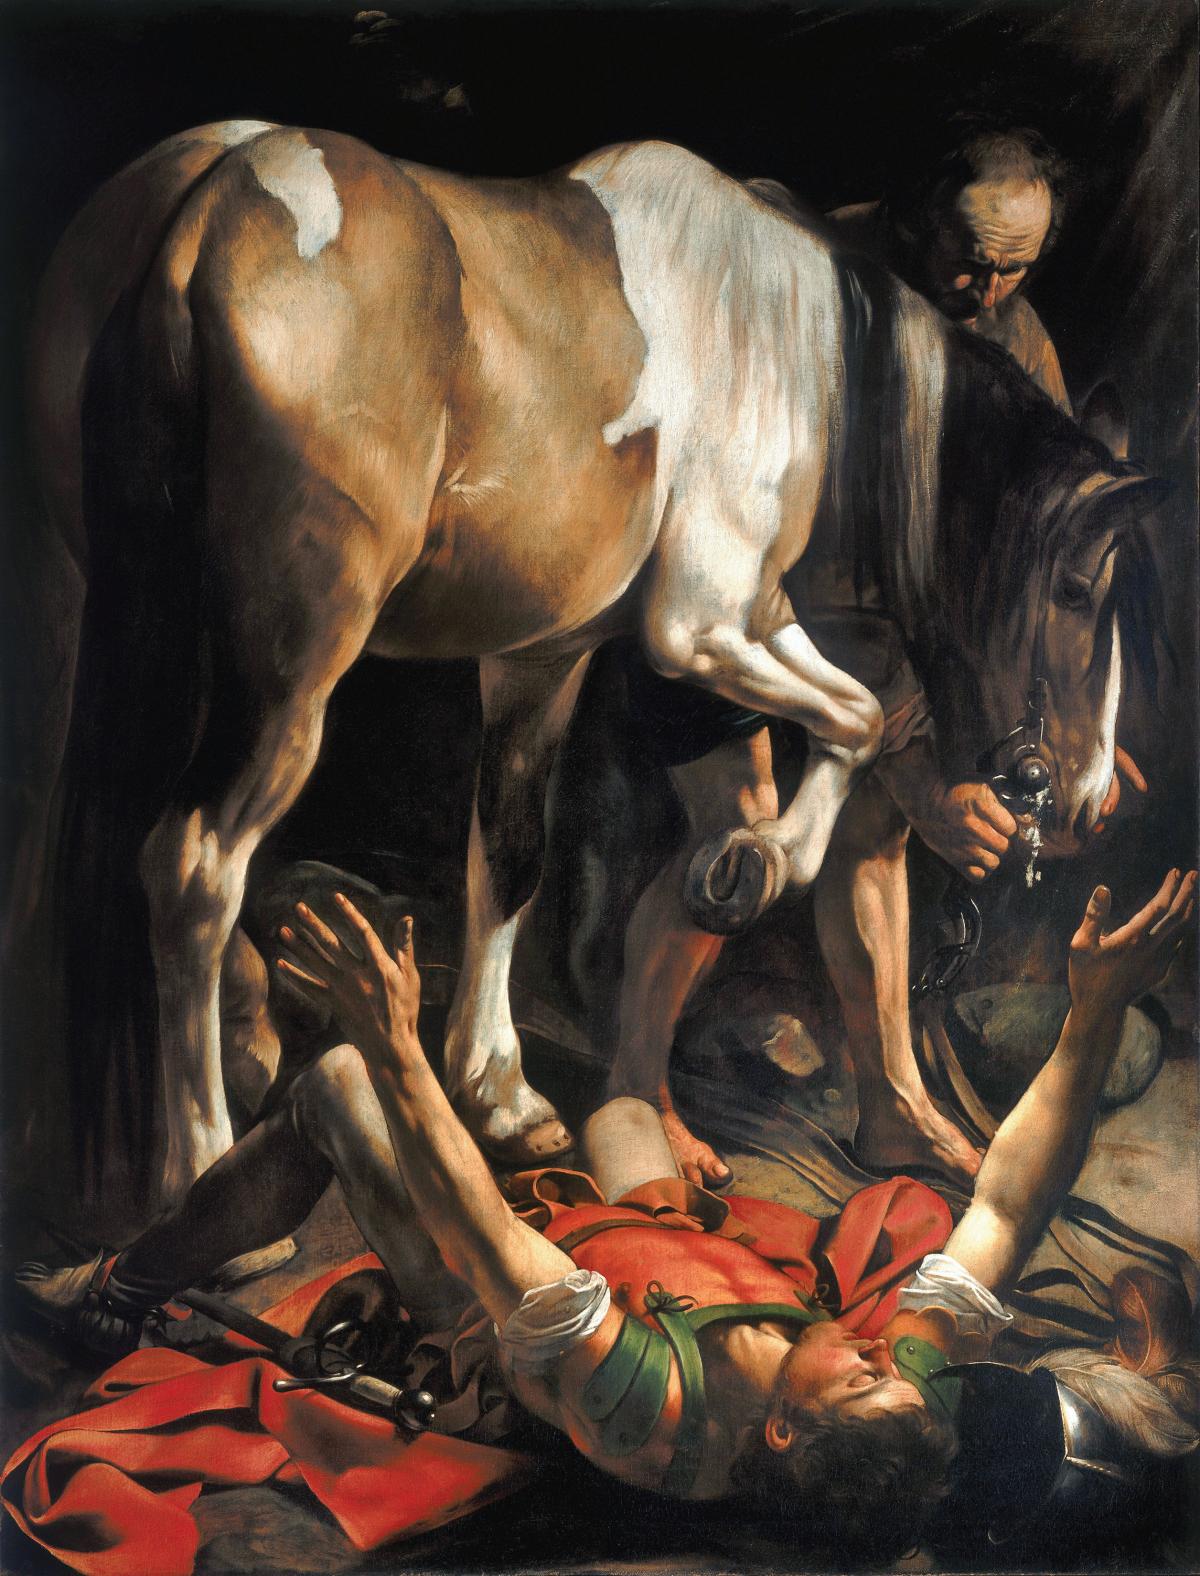 Caravaggio's painting The Conversion of St. Paul